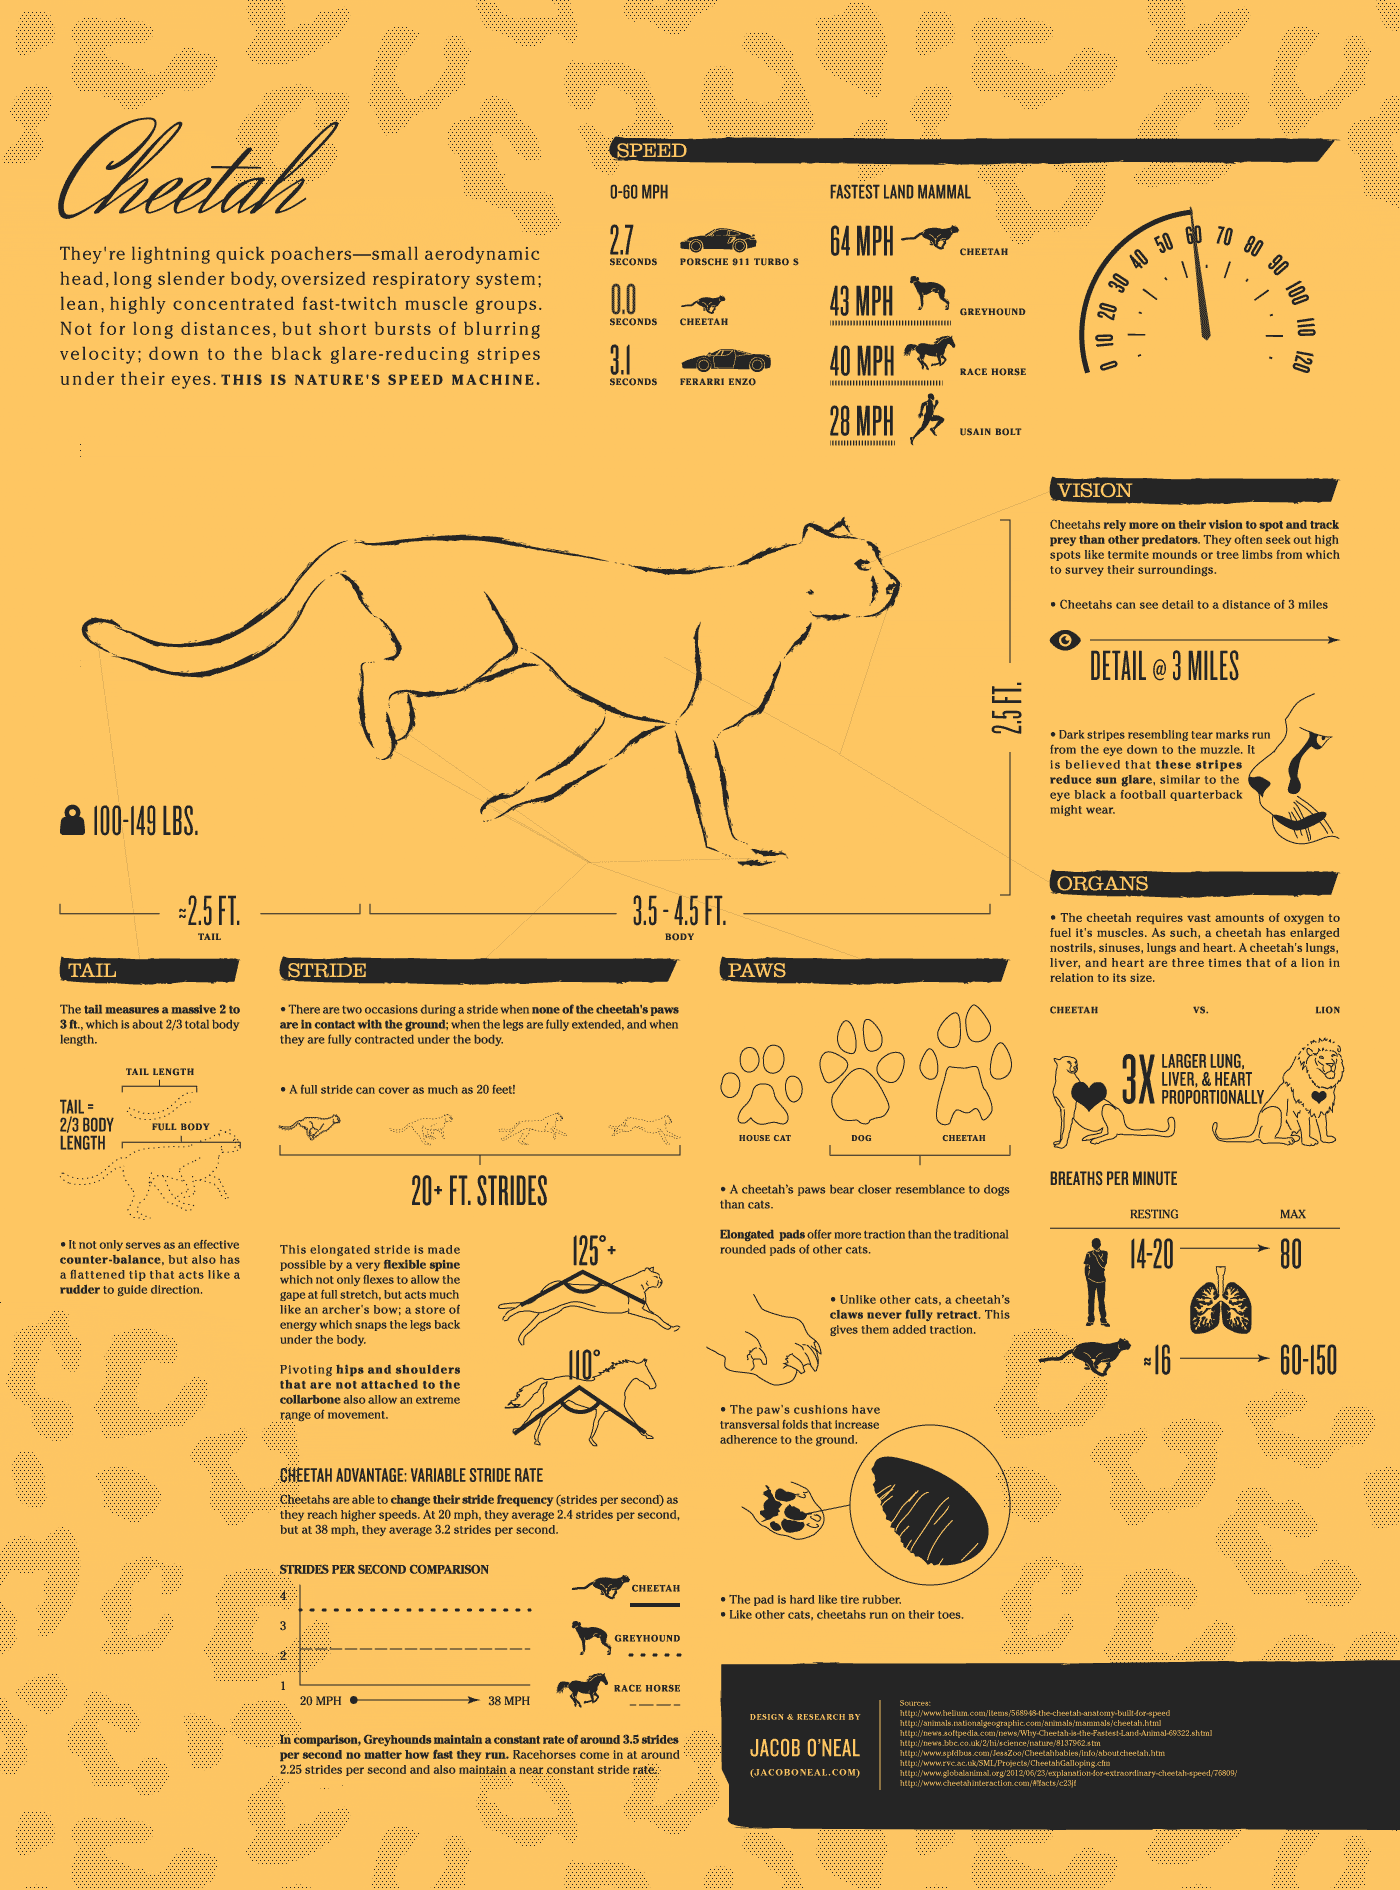 The Cheetah: World's Fastest Land Mammal | Daily Infographic